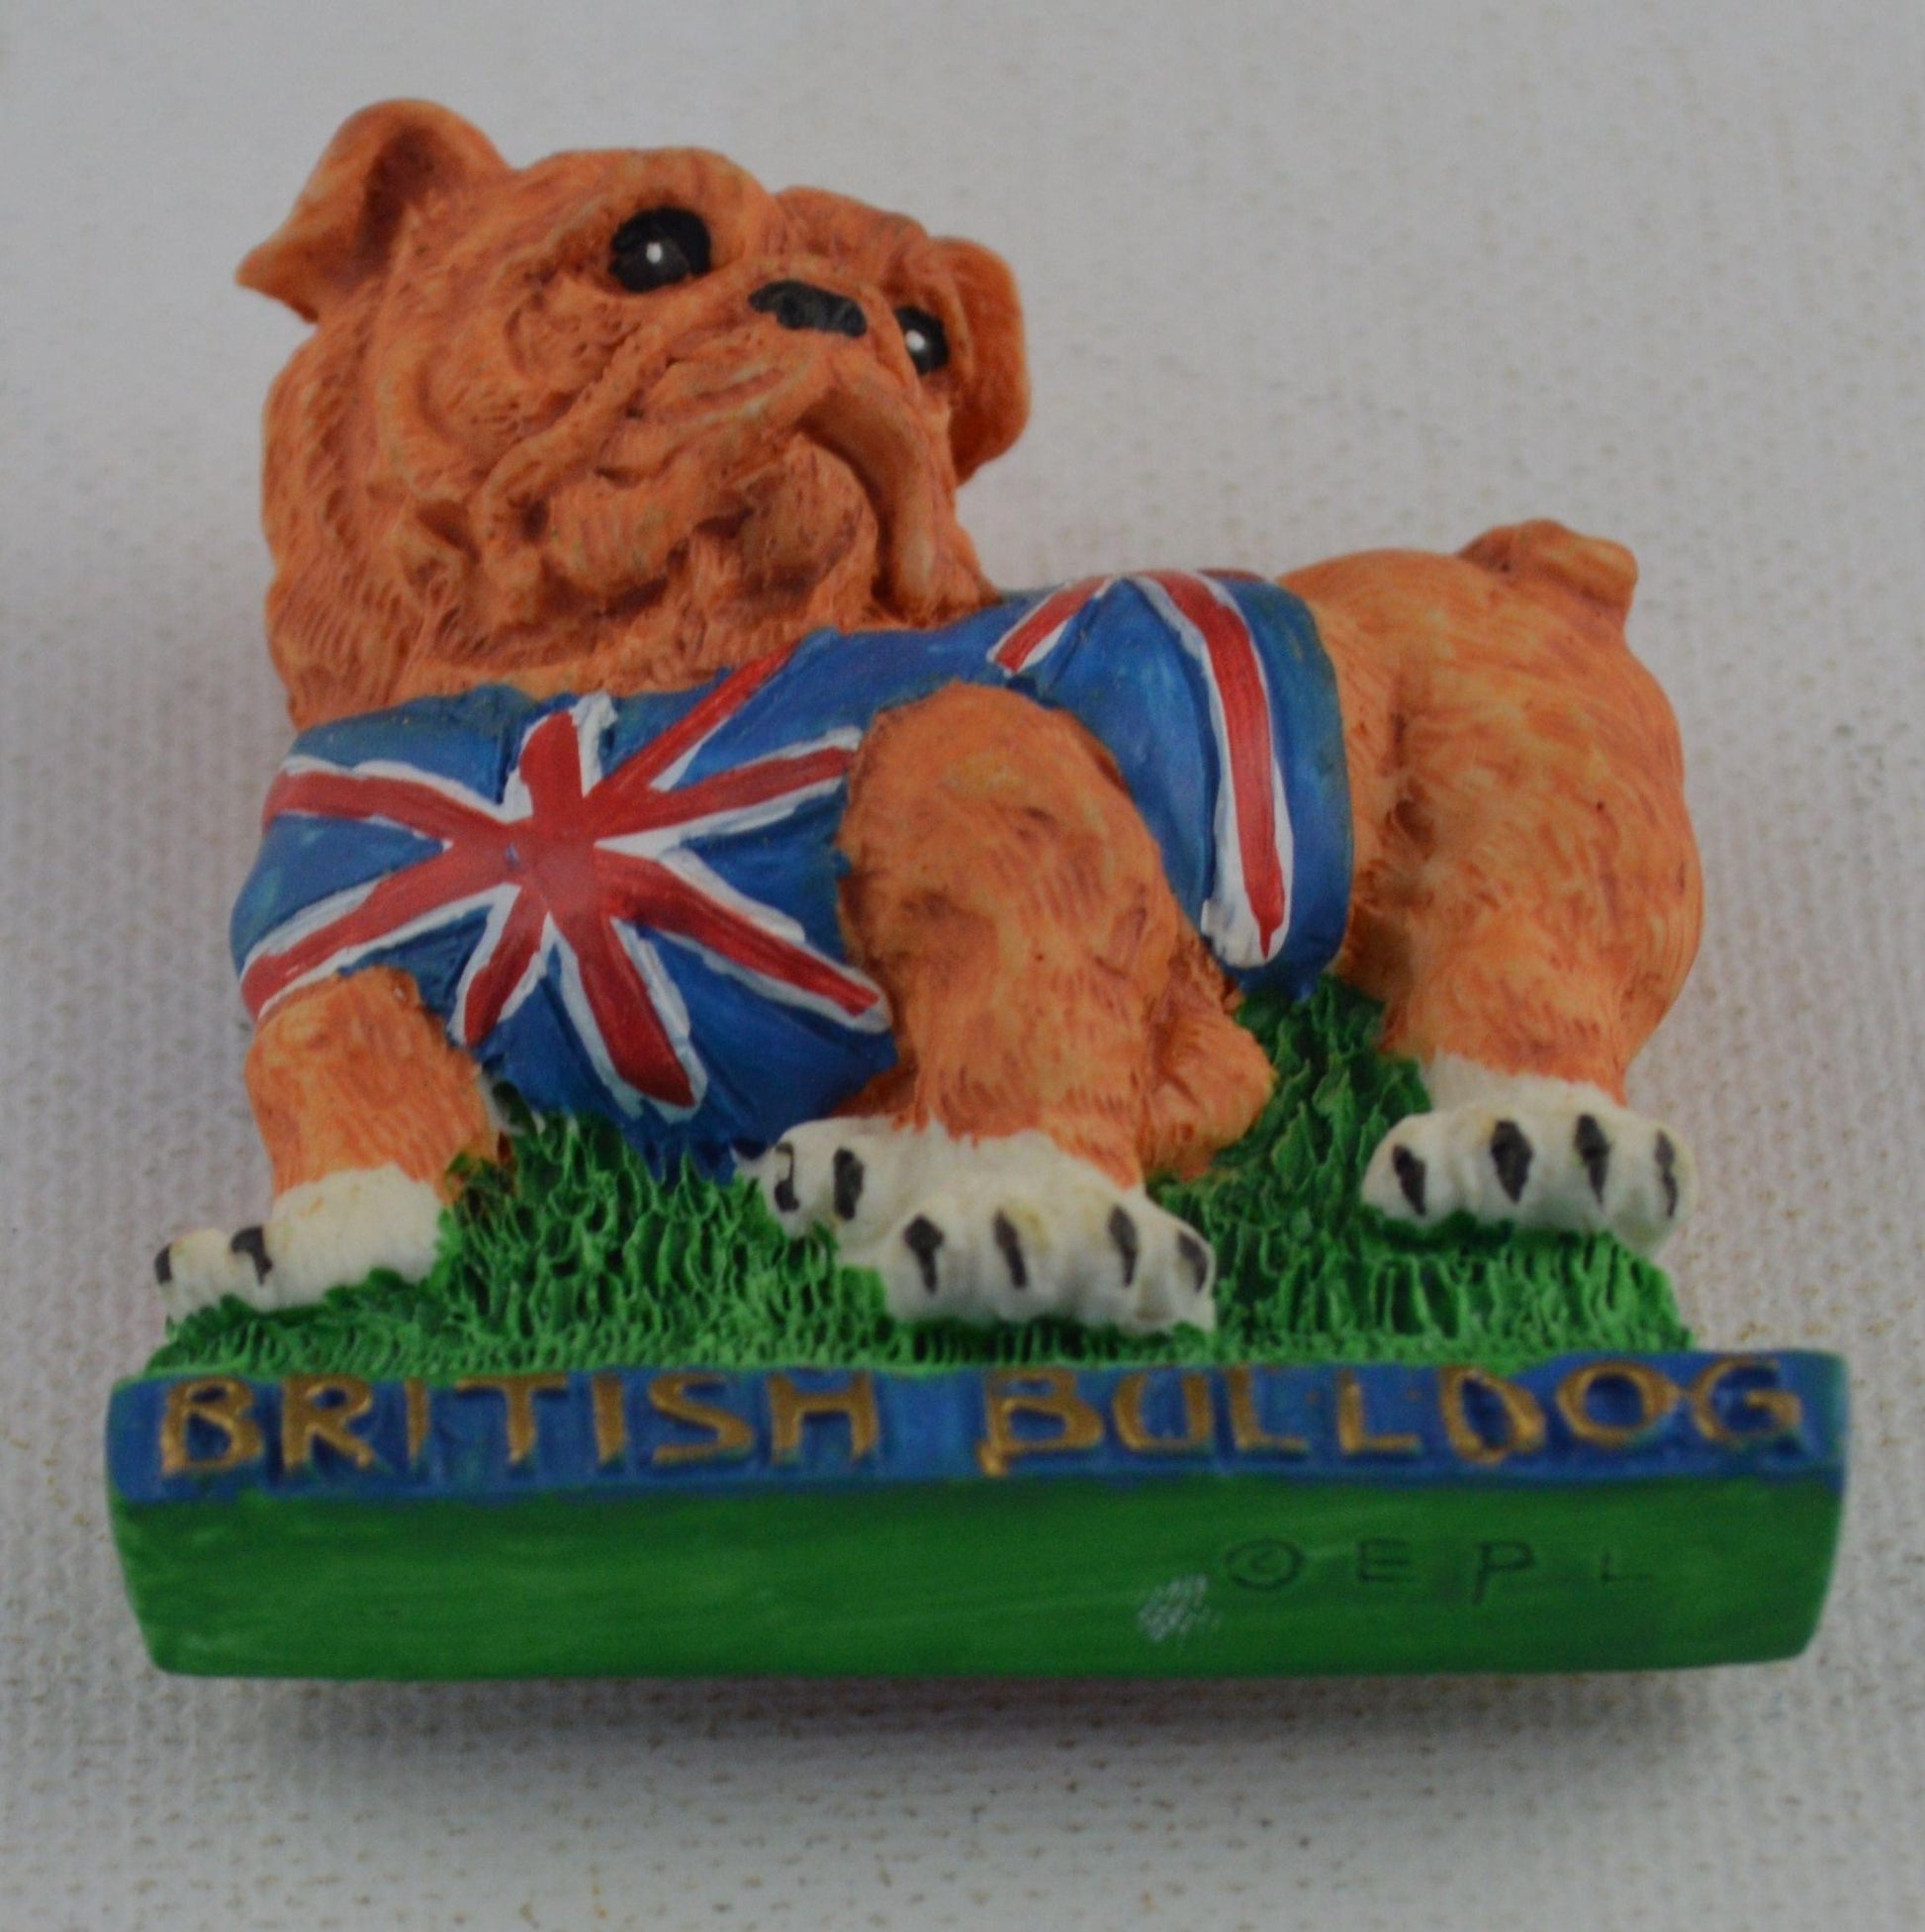 FOUR BRITISH BULLDOG FRIDGE MAGNETS CUGGLY WUGGLIES COLLECTION(SHOP CLEARANCE) - TMD167207